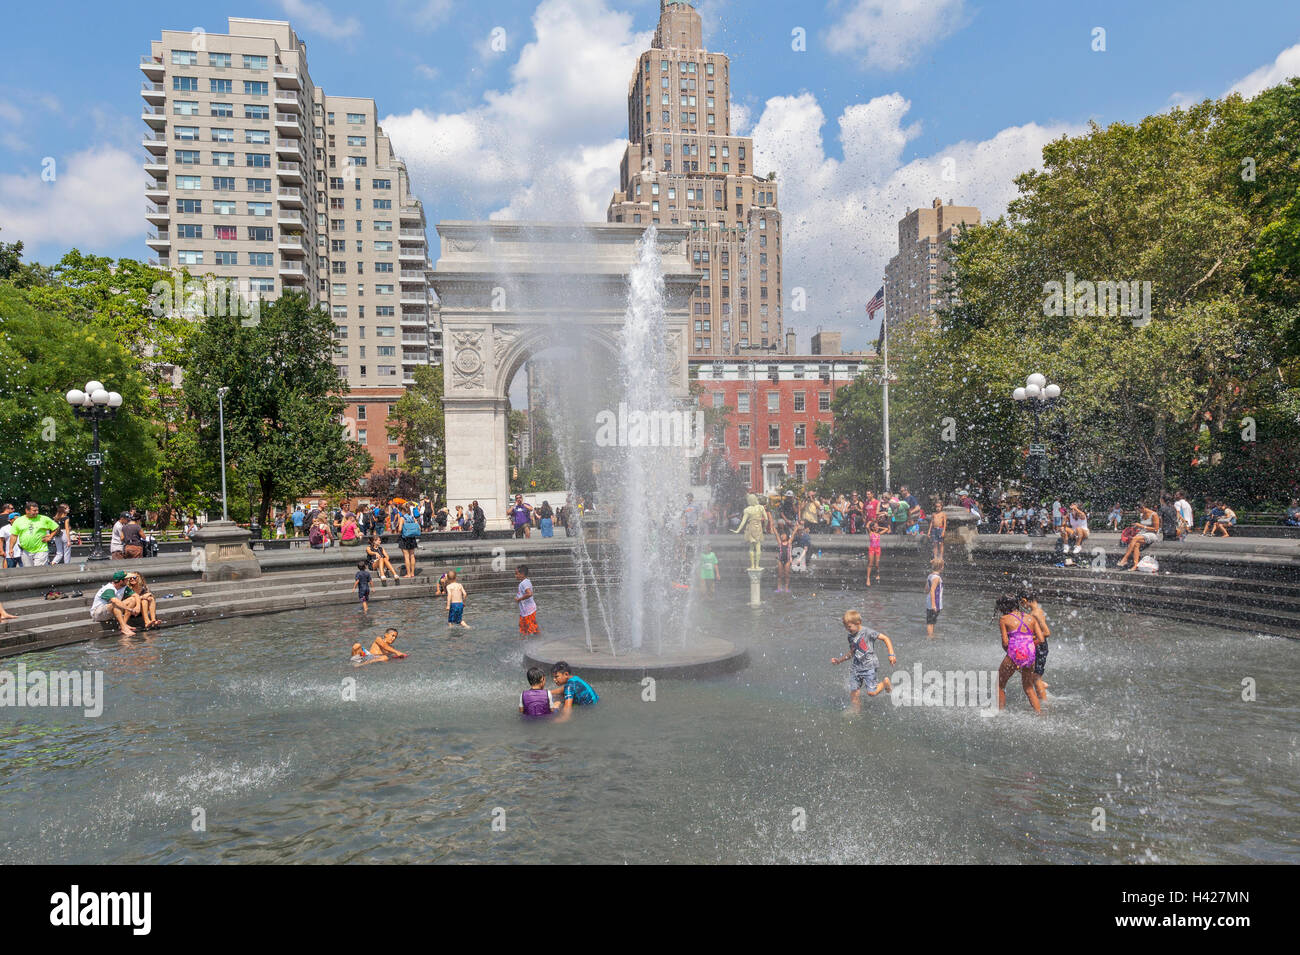 Washington Square Park Arch in New York City and people playing in the water fountain. Stock Photo